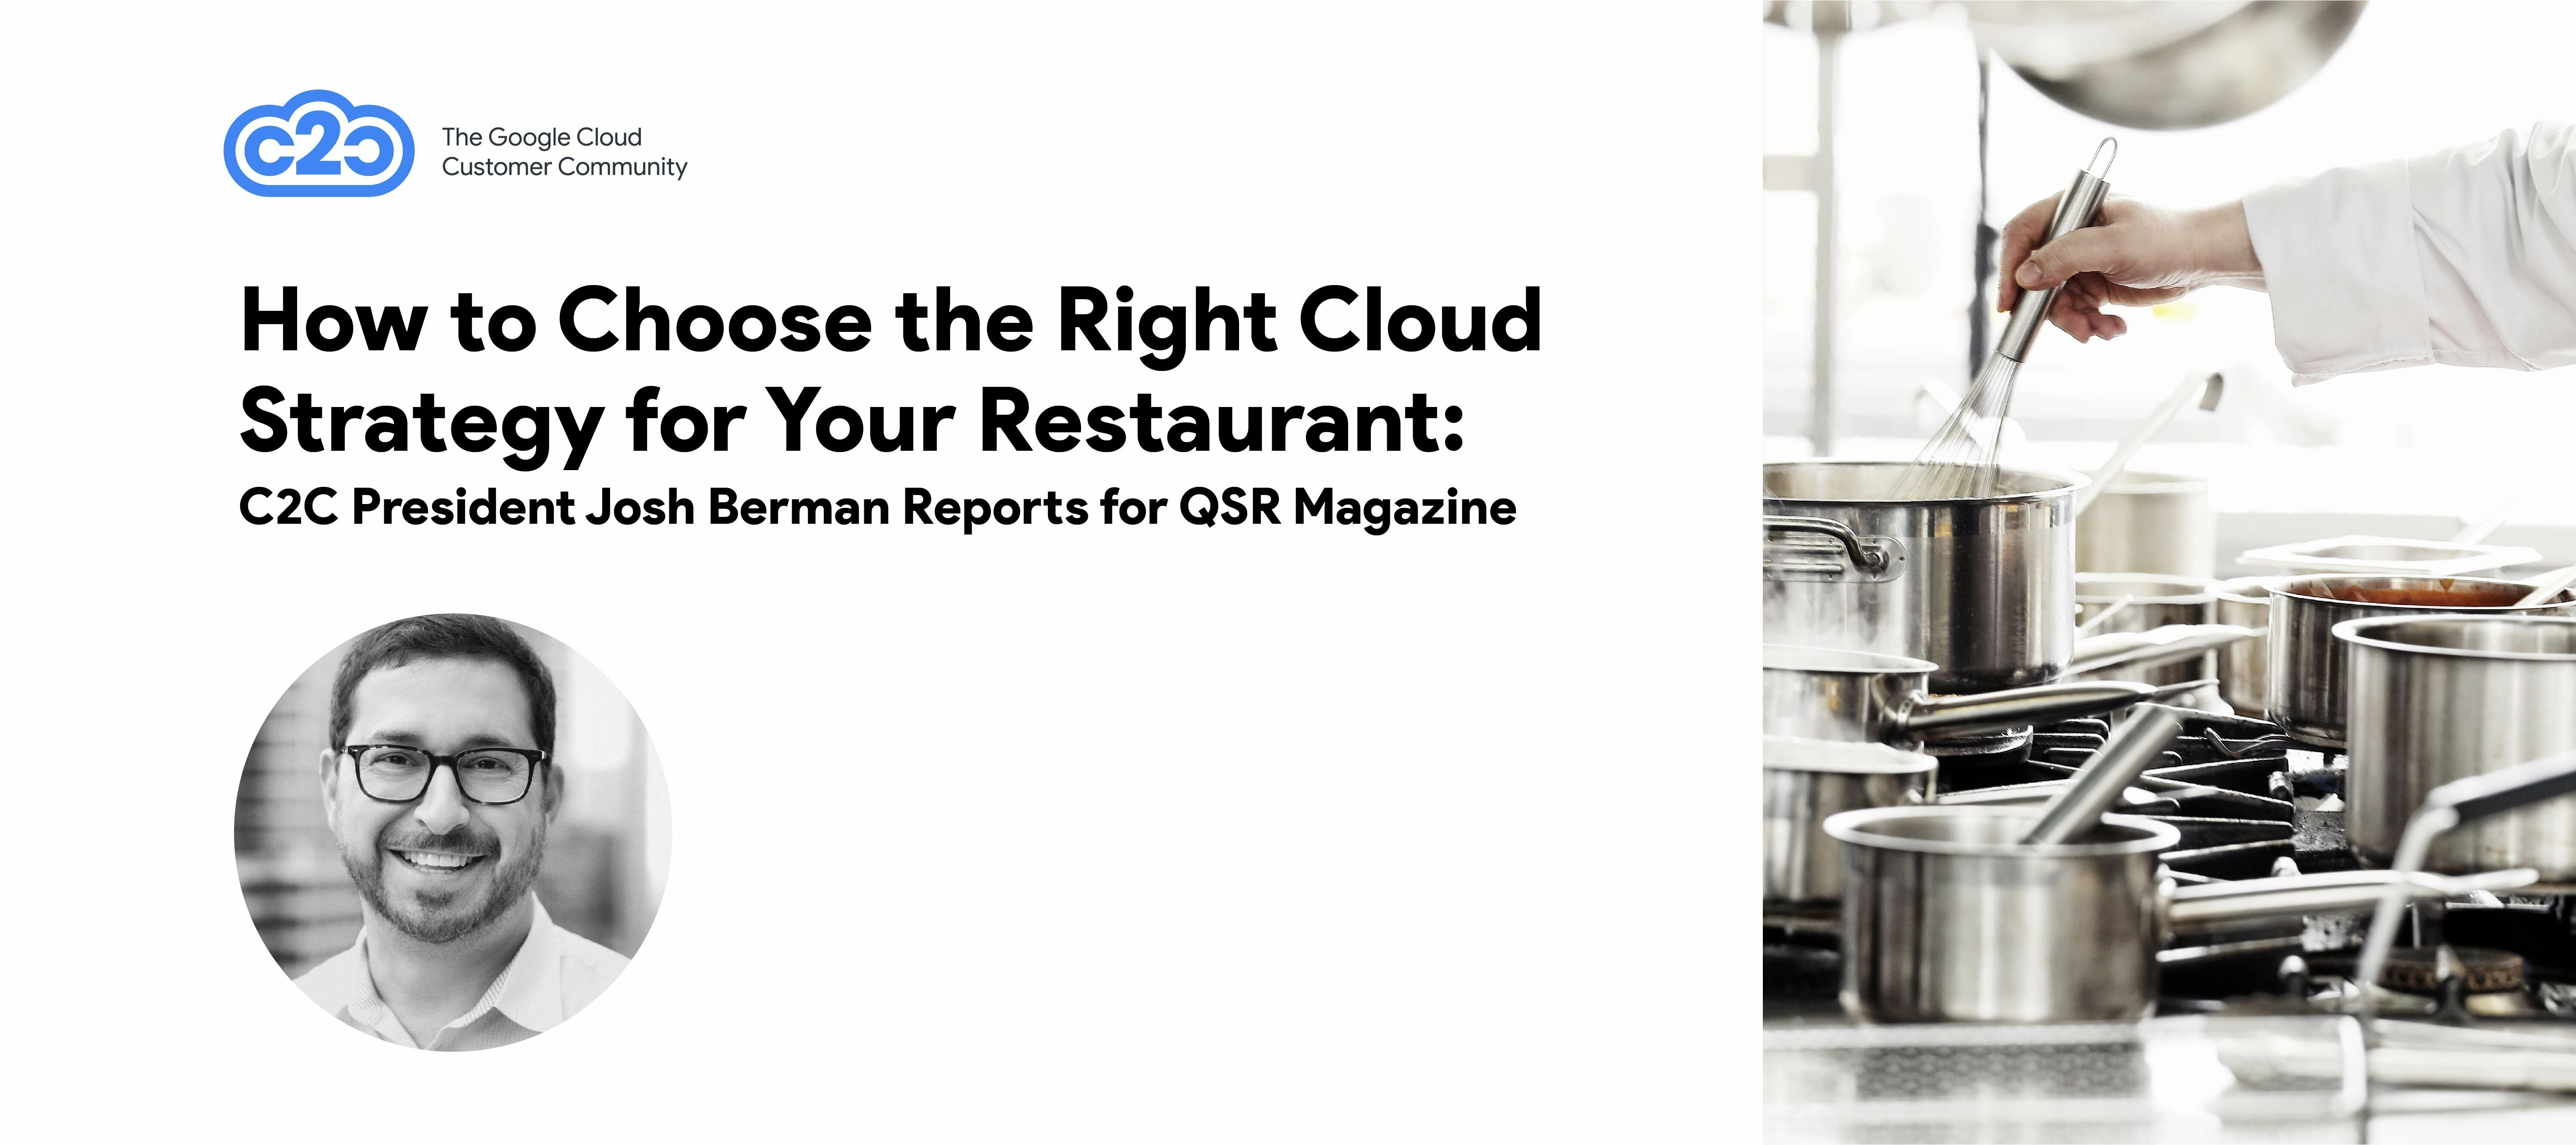 How to Choose the Right Cloud Strategy for Your Restaurant: C2C President Josh Berman Reports for QSR Magazine